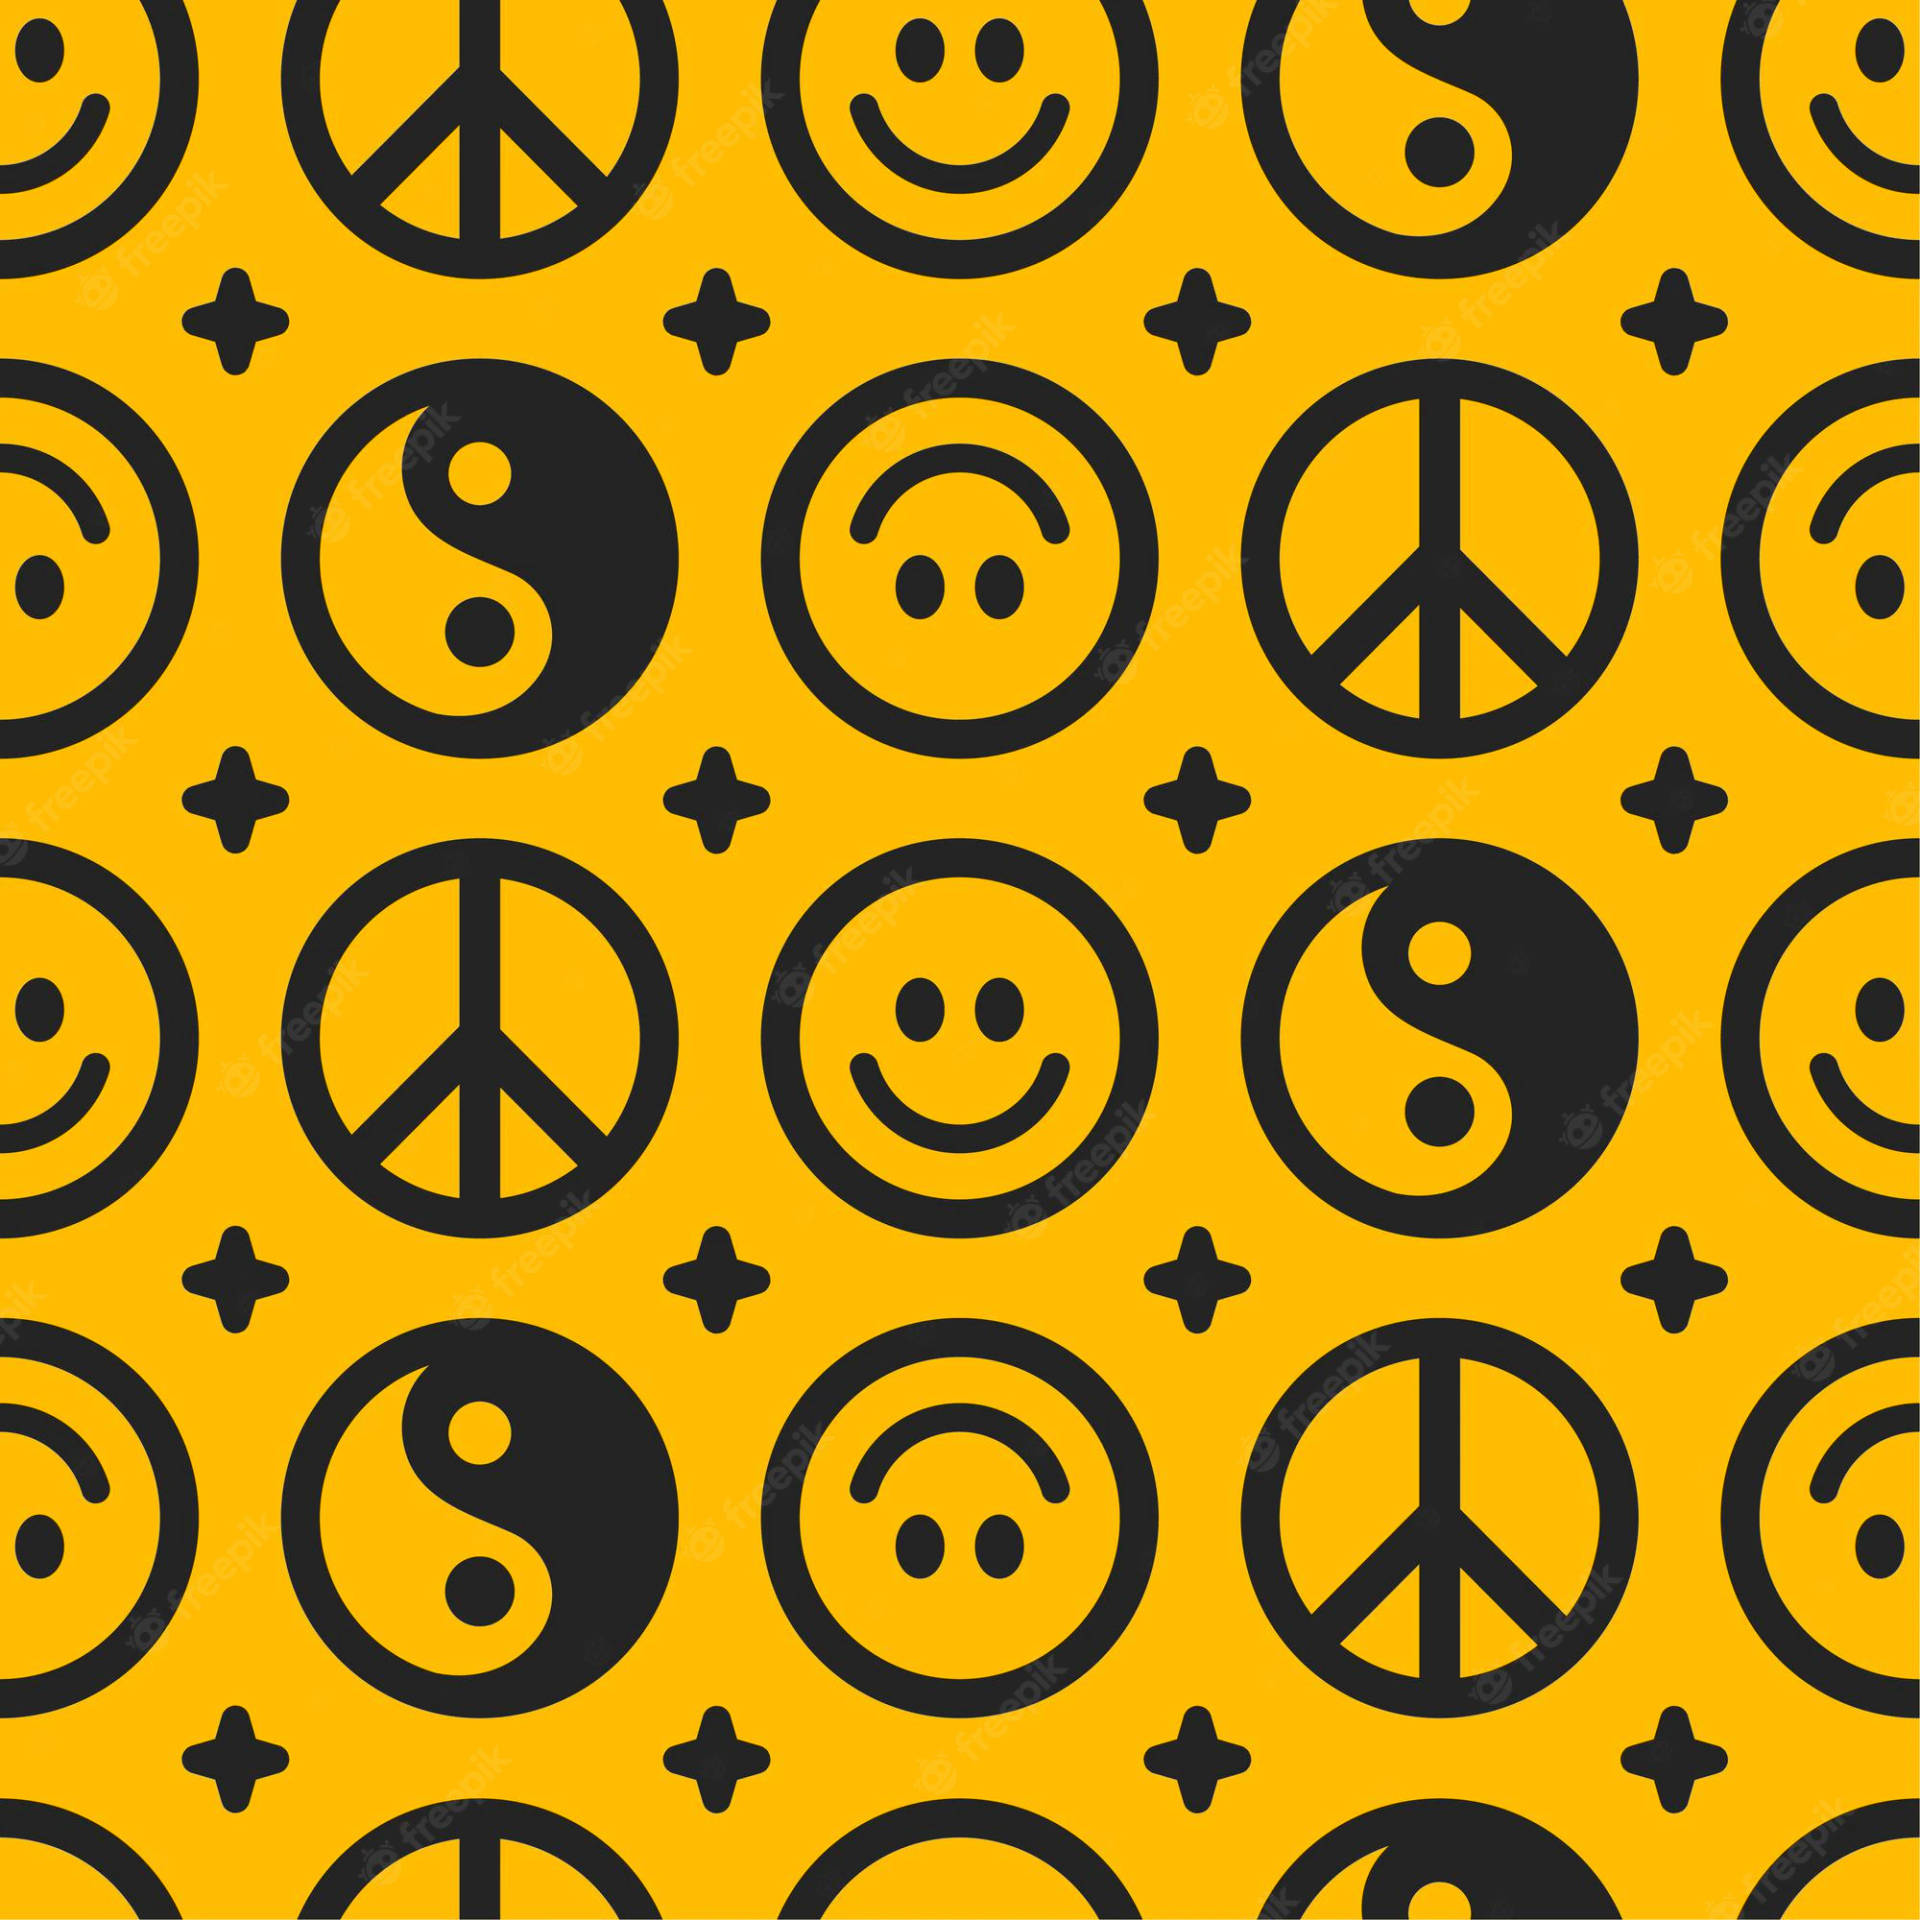 peace signs and smiley faces wallpaper